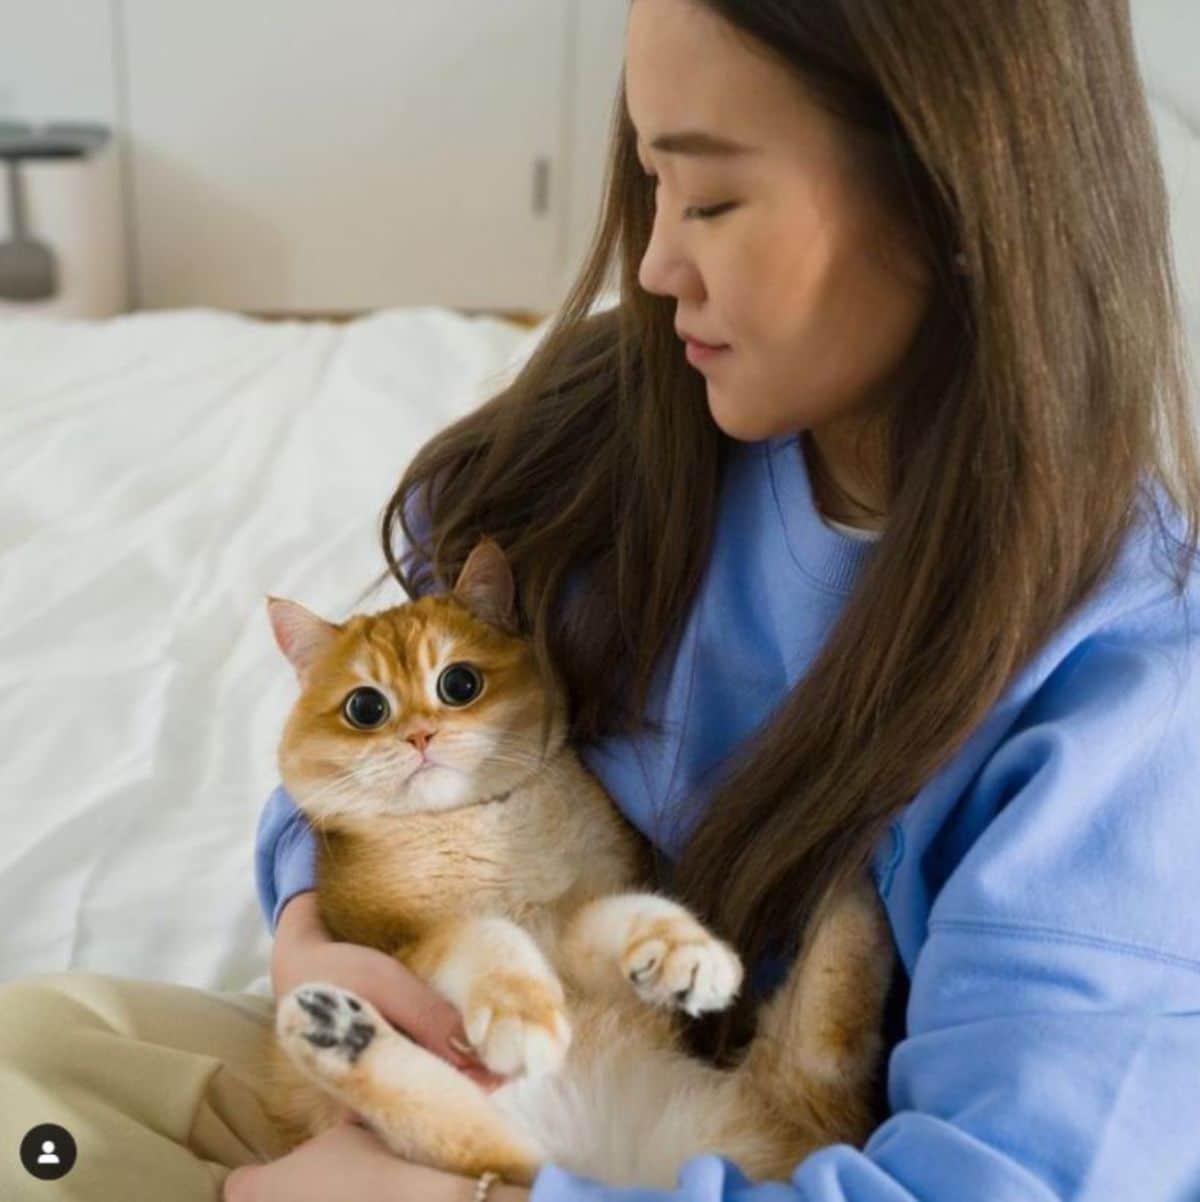 orange cat with large black eyes being held by a woman wearing a blue sweater